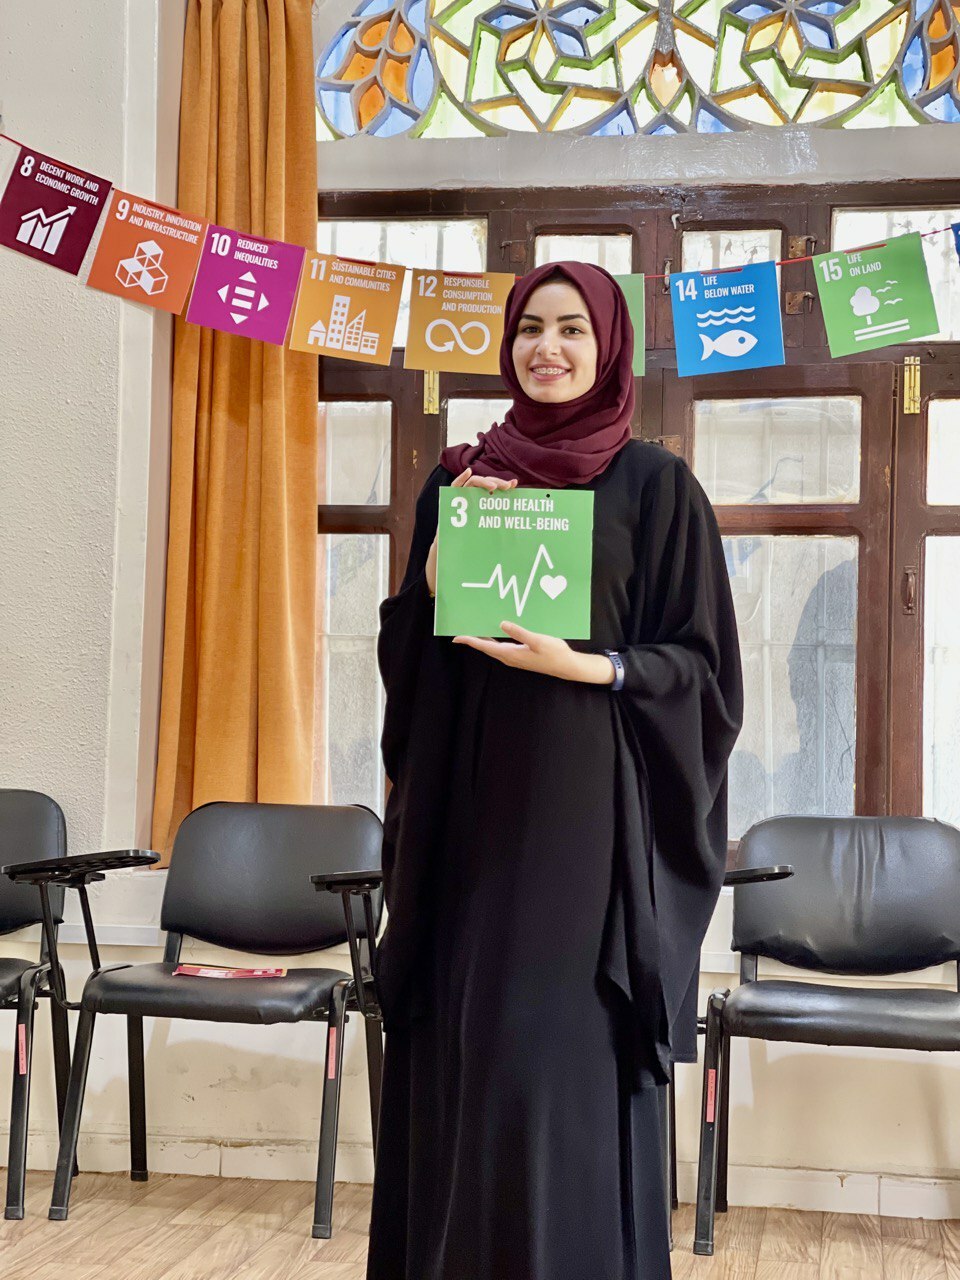 Haya Holding An Sdg Sign In Front Of An Sdg Banner